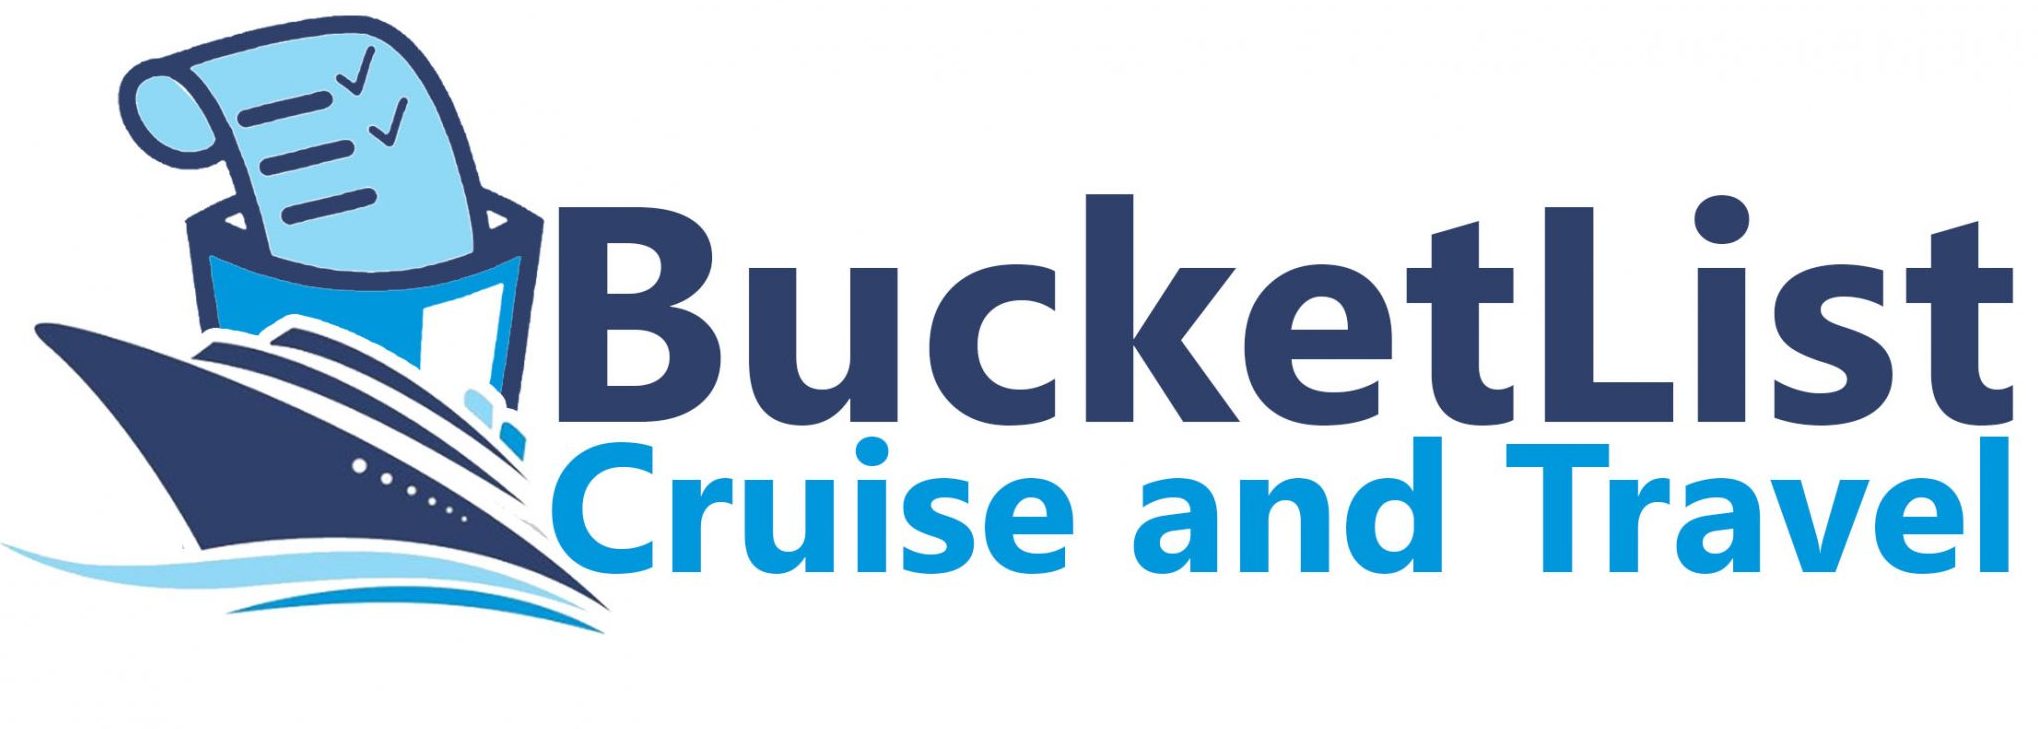 Bucket List Cruise and Travel – Travel Checks Sold Here